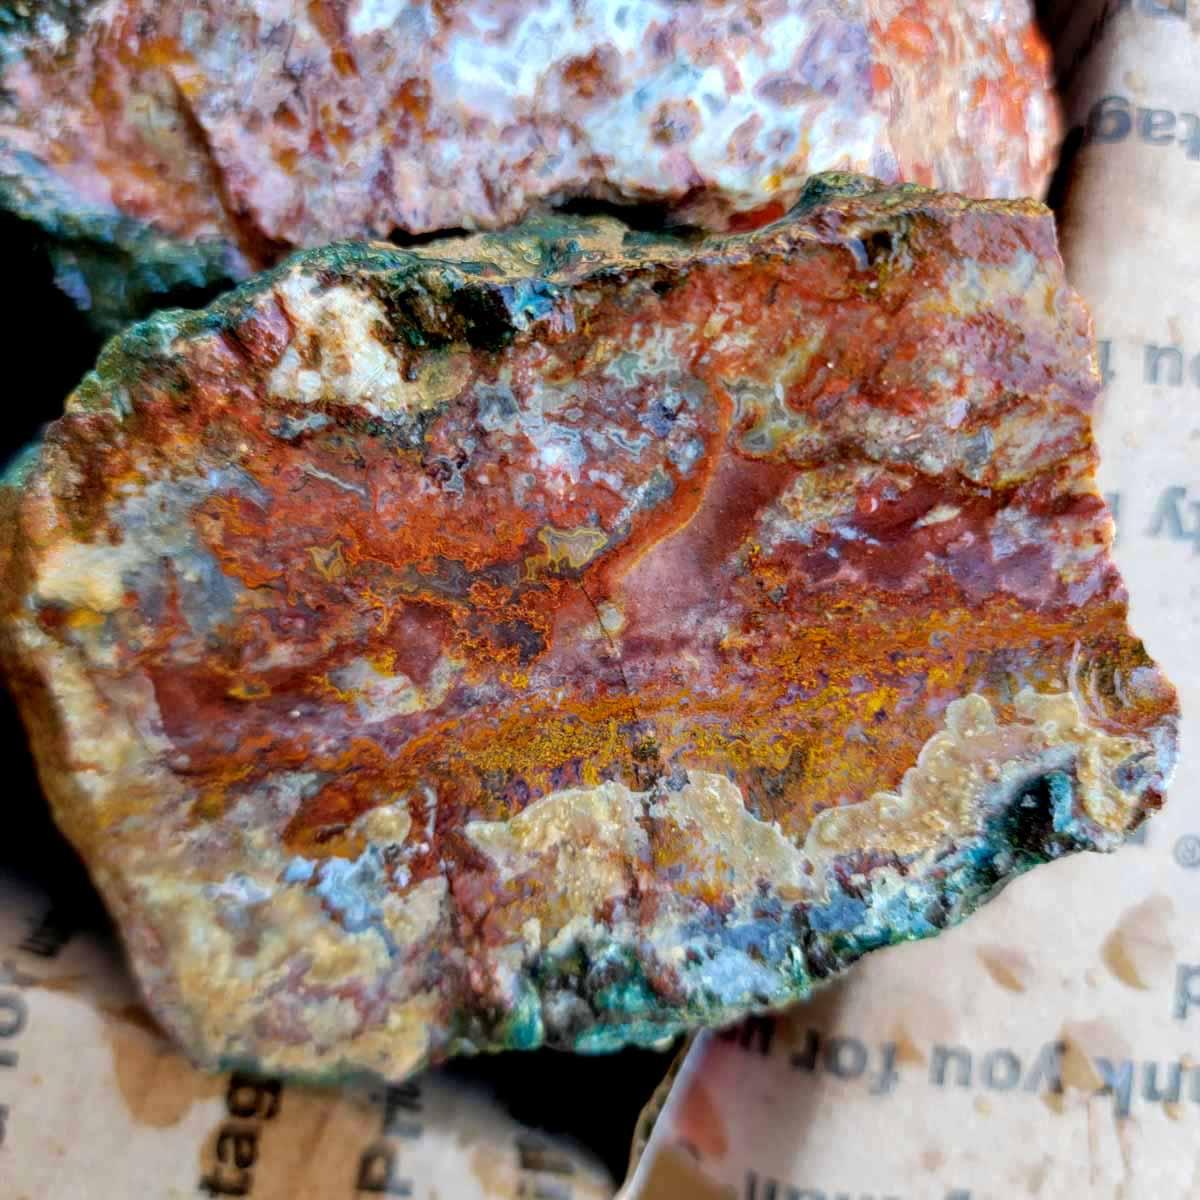 Apple Valley Agate Cutting Rough Flatrate! - Lapidary Central